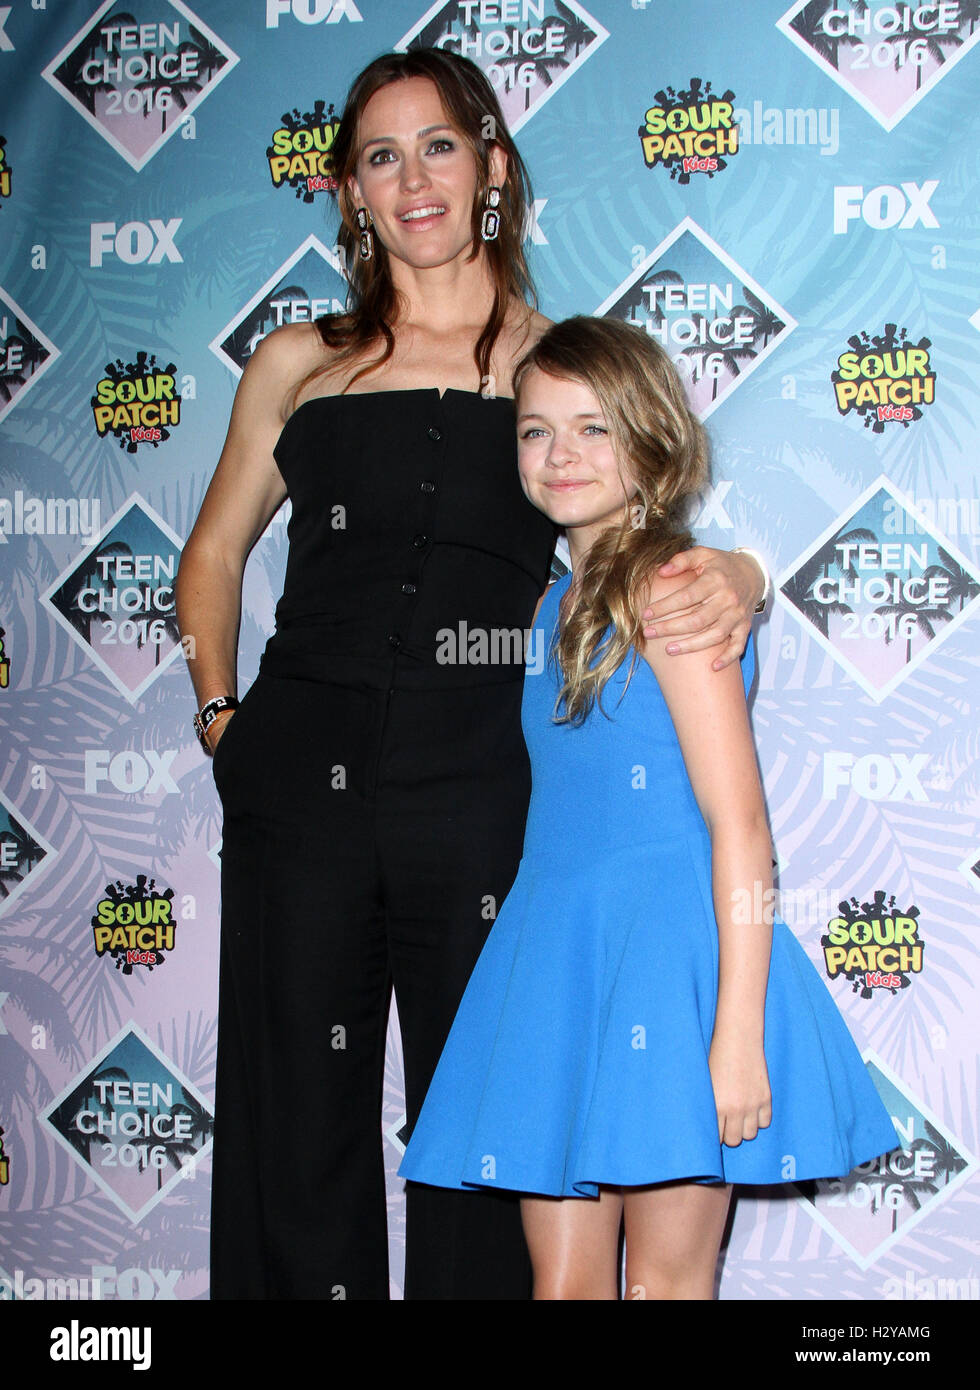 Teen Choice Awards 2016 Press Room held at The Forum Featuring: Jennifer  Garner, Kylie Rogers Where: Los Angeles, California, United States When: 01  Aug 2016 Stock Photo - Alamy